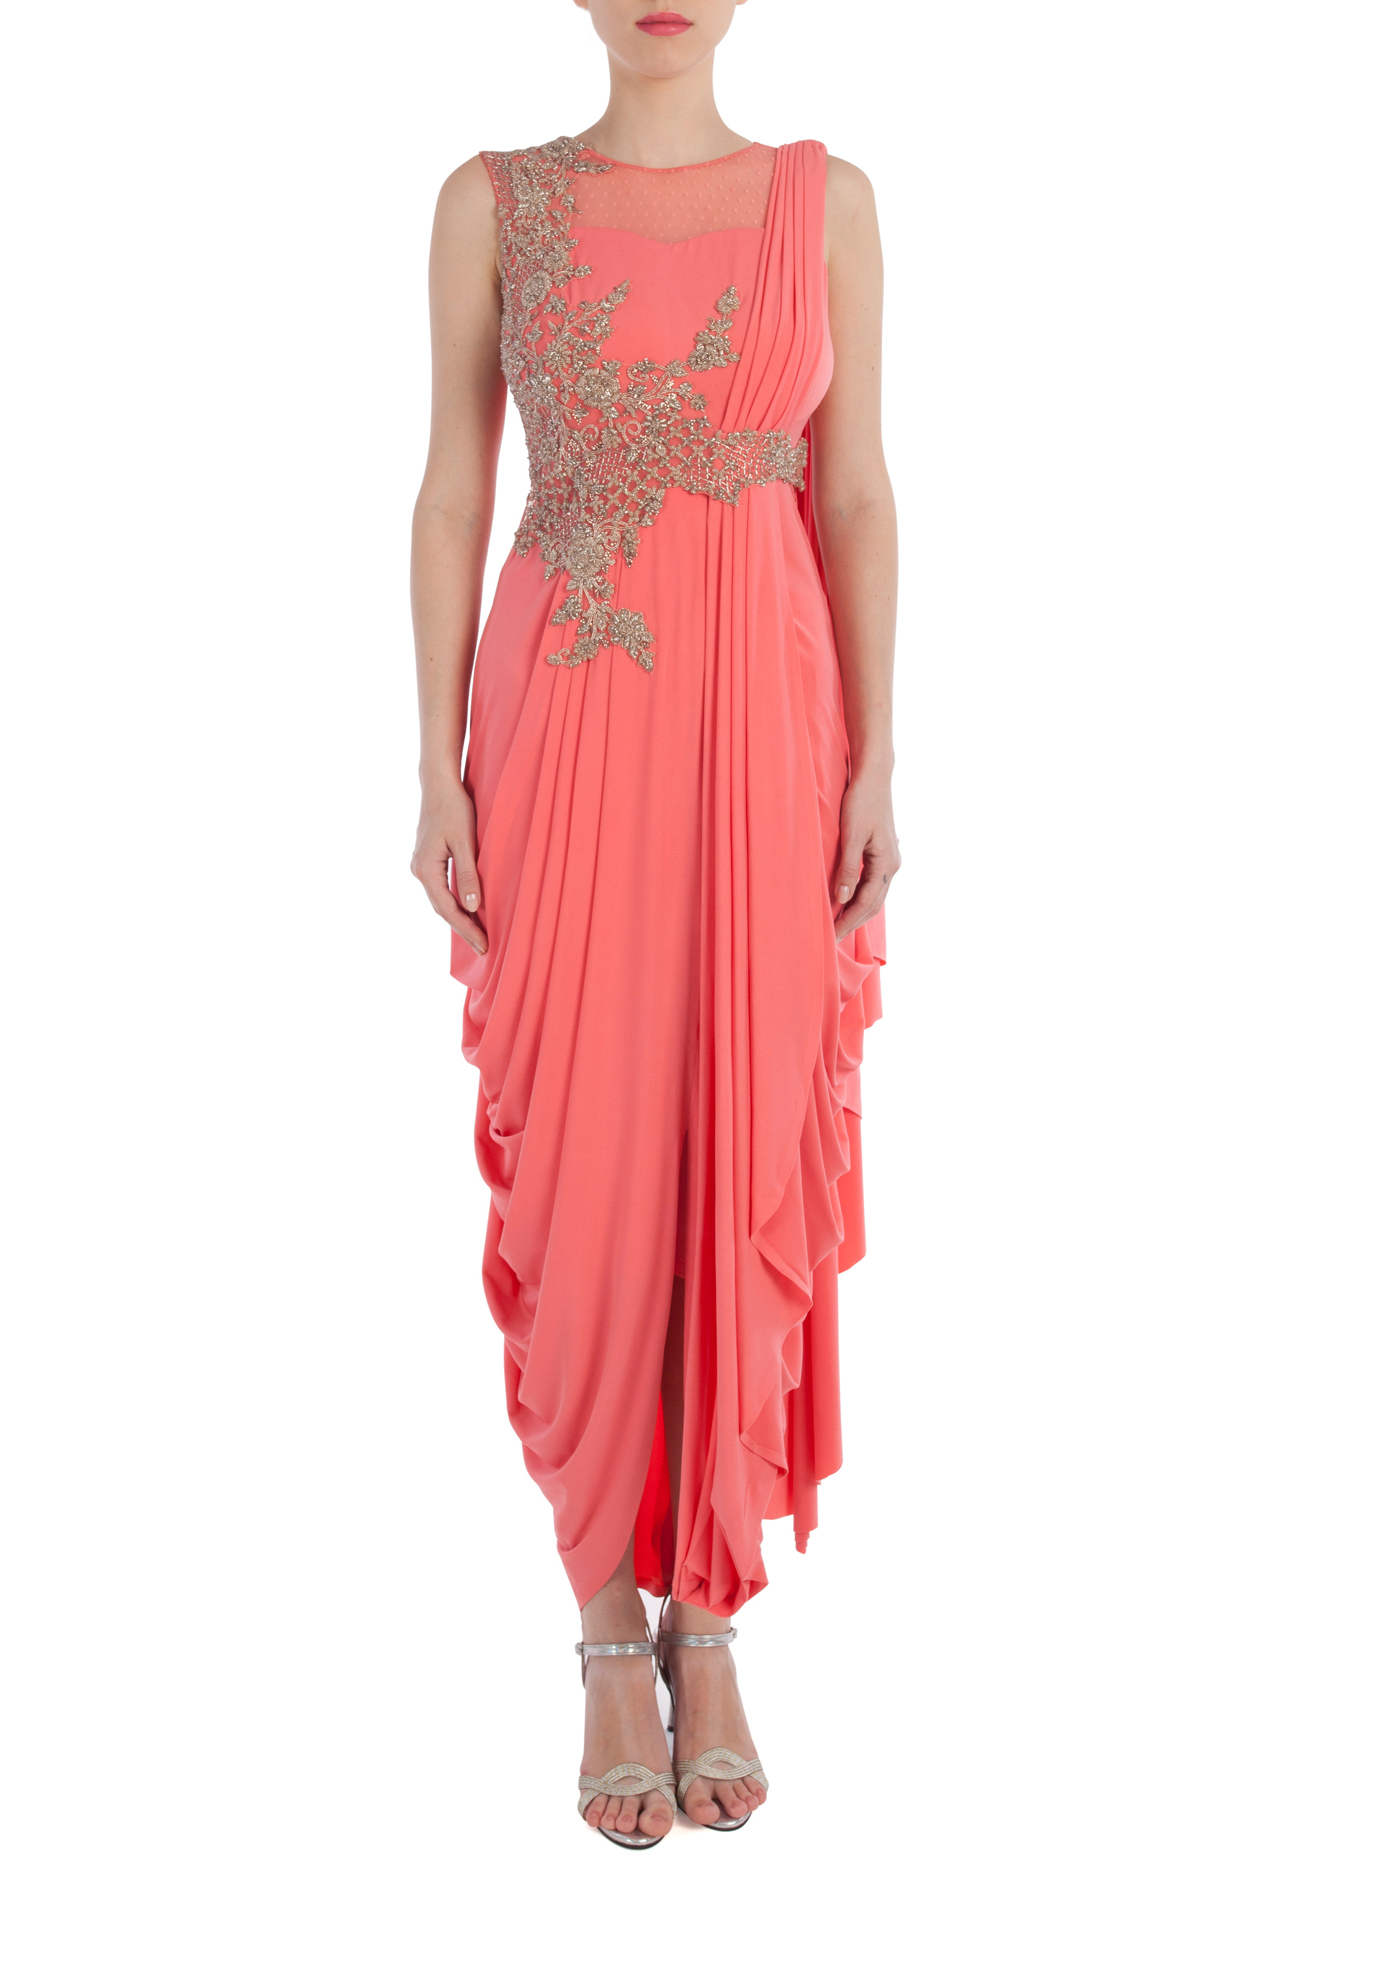 Peachlifter draped gown by Dolly J | The Secret Label